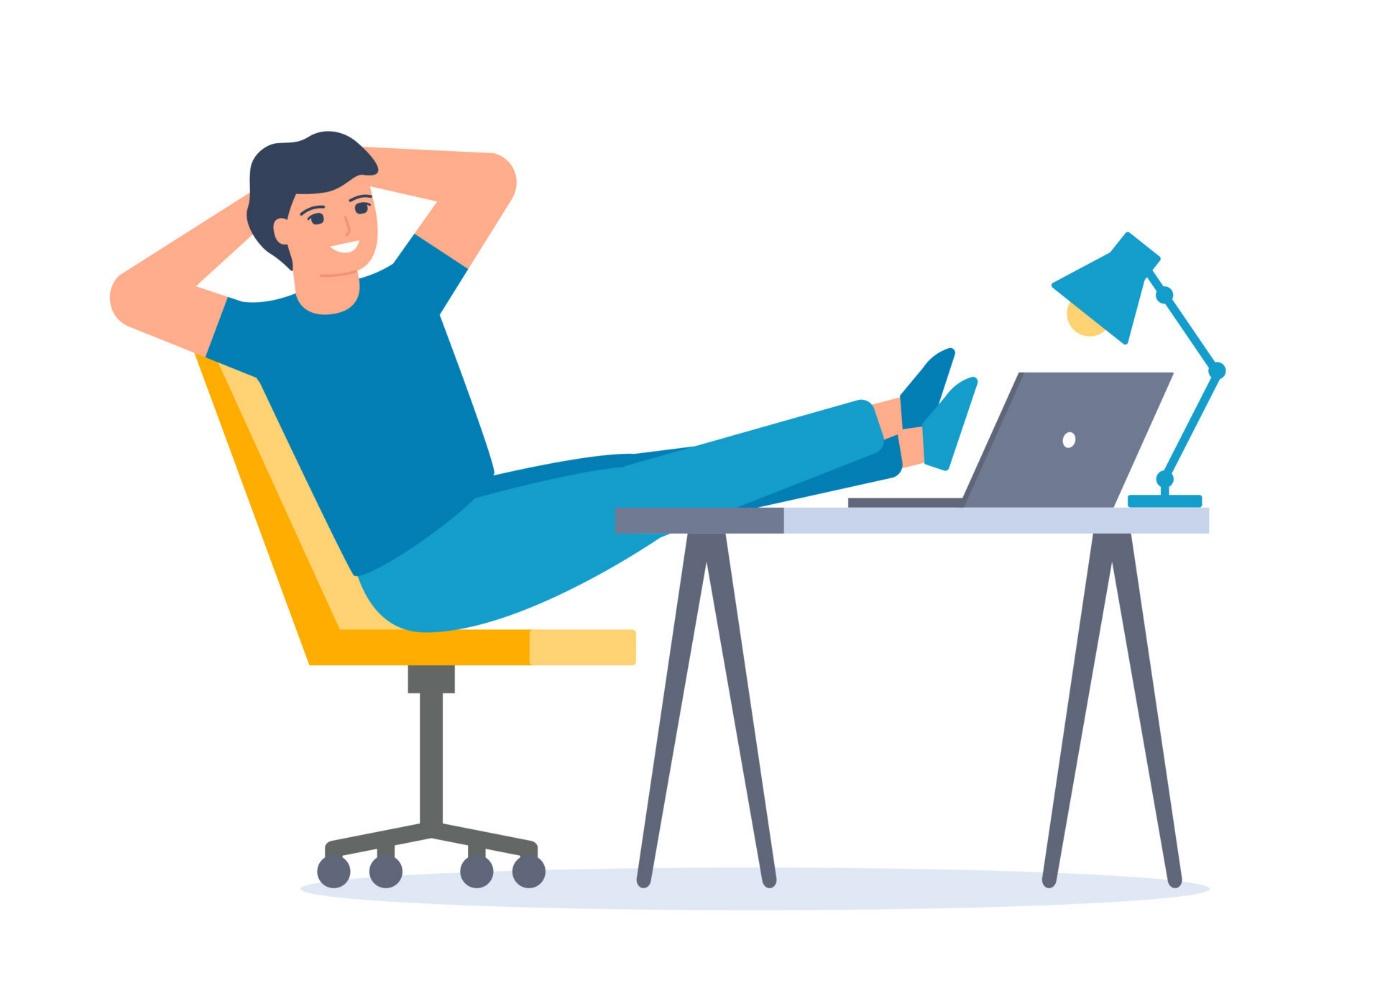 https://static.vecteezy.com/system/resources/previews/013/138/063/original/passive-work-man-relax-on-computer-man-rest-on-workplace-lazy-tired-person-break-time-illustration-vector.jpg